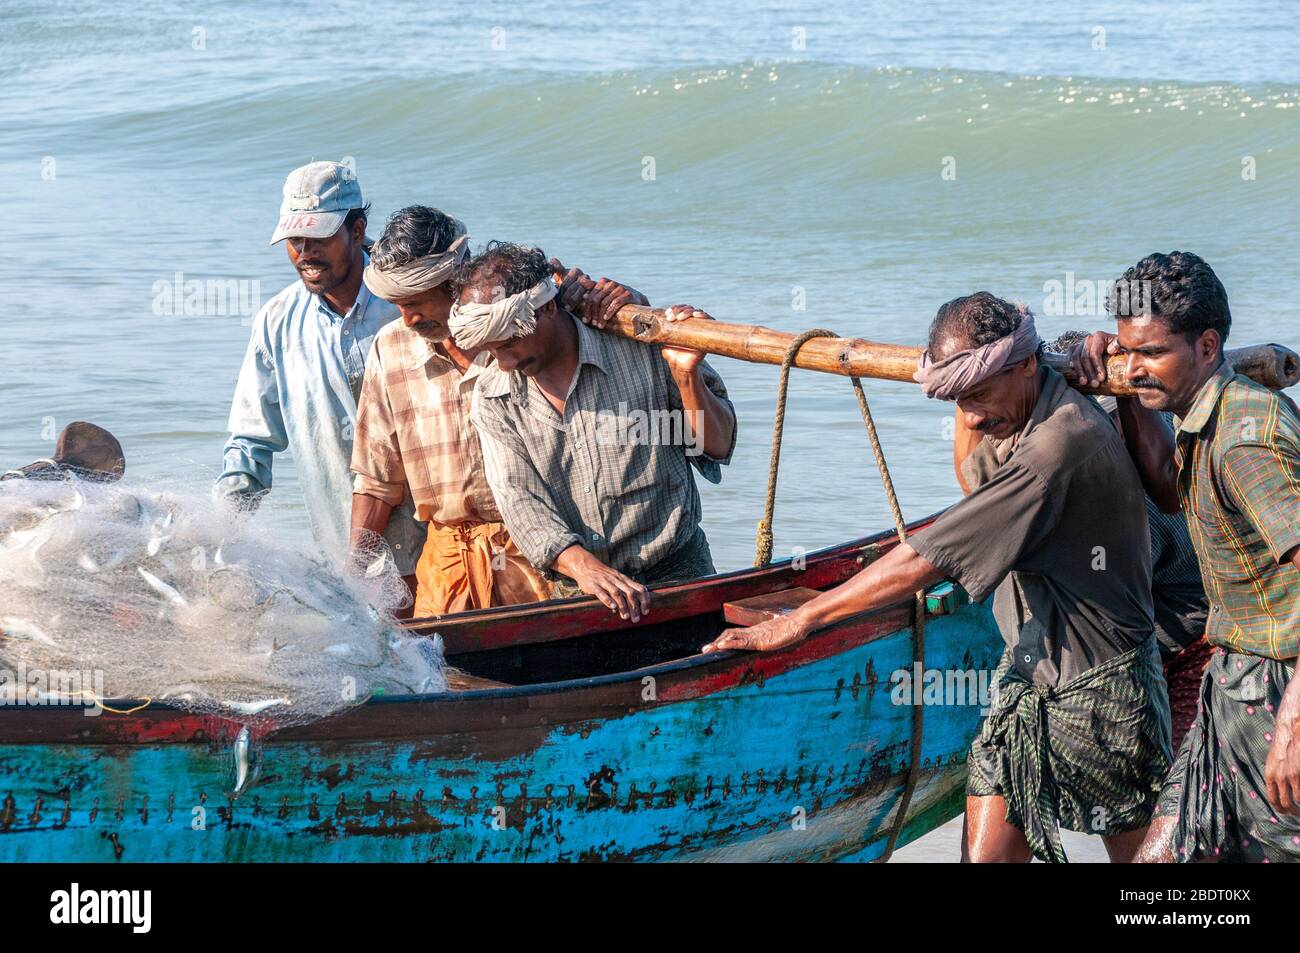 Fishermen hauling their traditional wooden boat from the sea on Marari Beach following an early morning fishing trip. Kerala, India Stock Photo